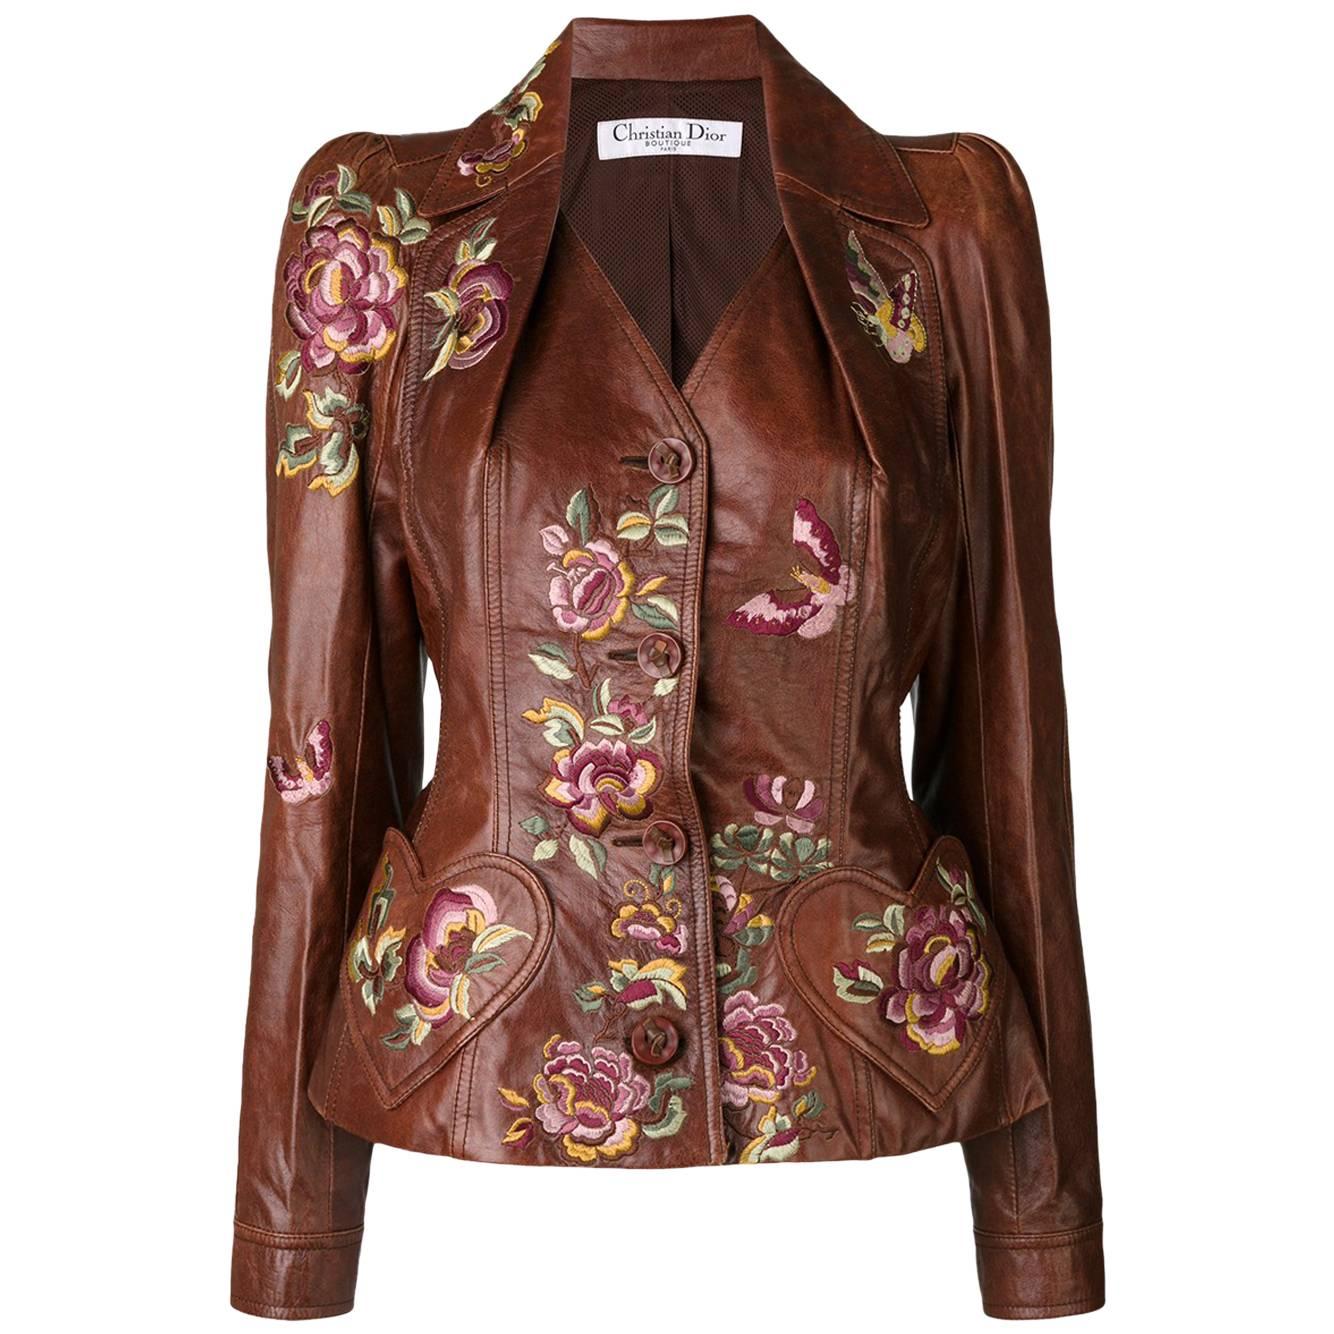 200os Christian Dior by John Galliano embroidered leather jacket